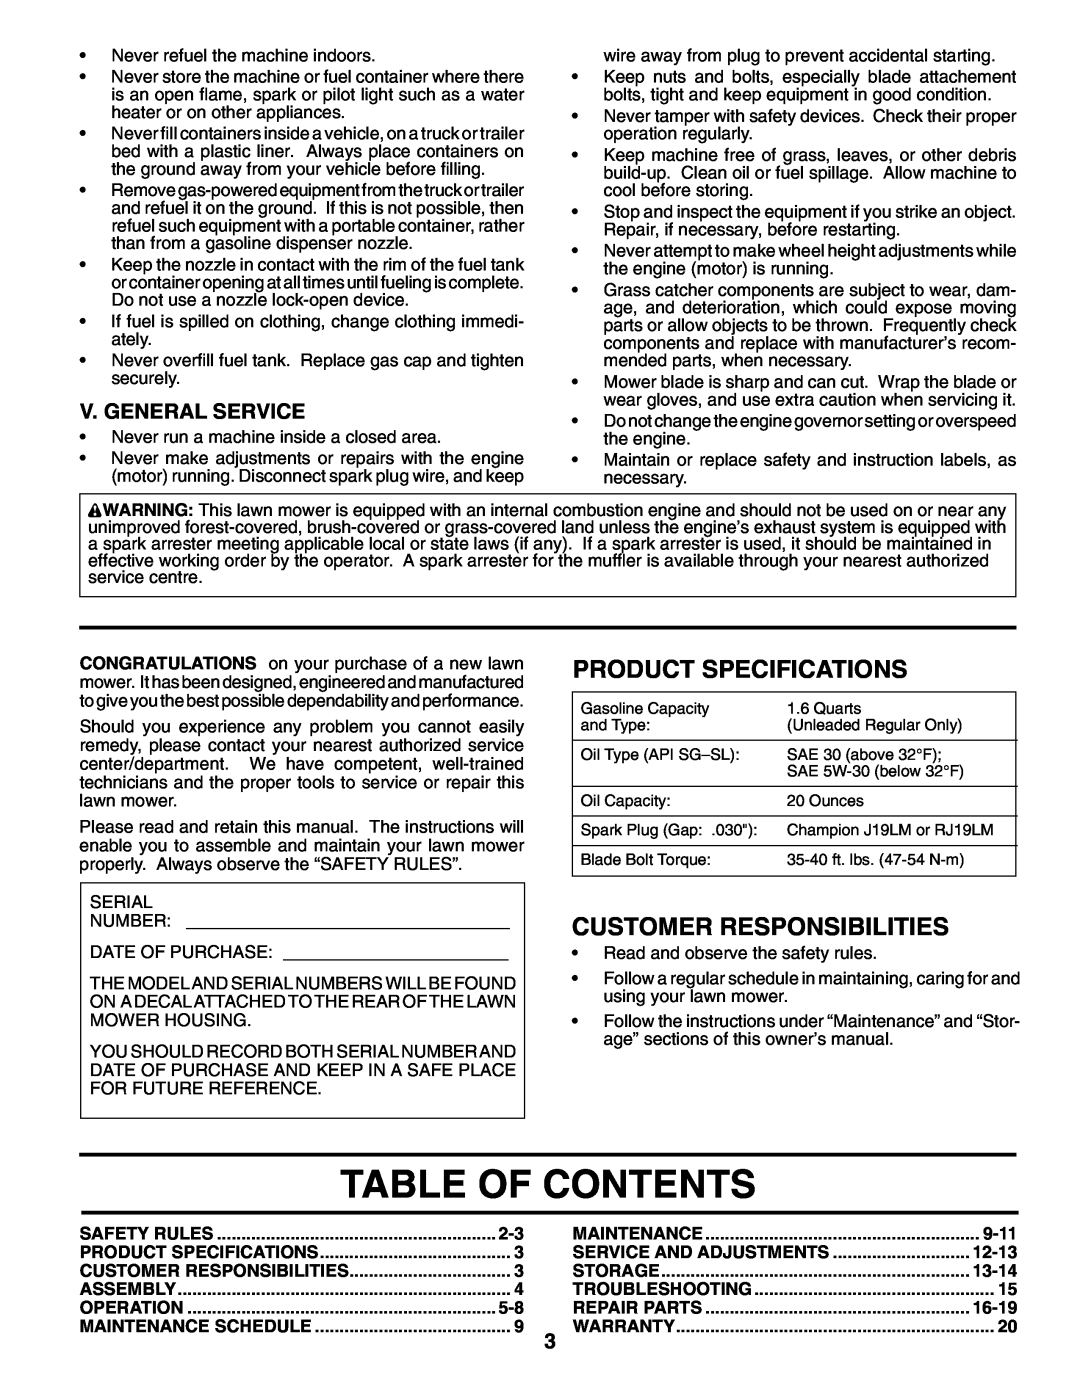 Husqvarna 6522SL Table Of Contents, Product Specifications, Customer Responsibilities, V. General Service, 9-11, 12-13 